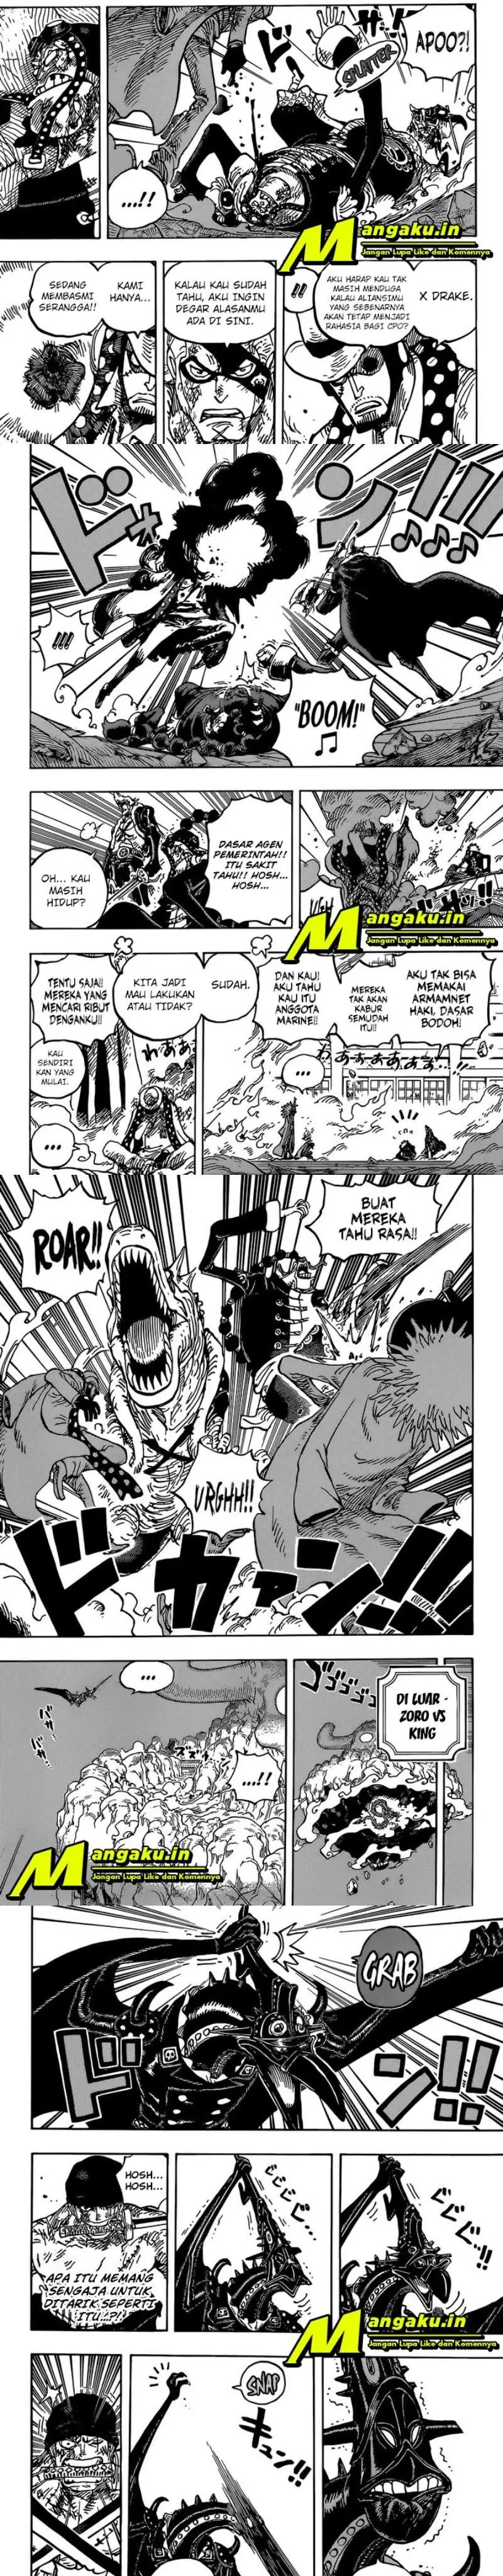 One Piece Chapter 1032 Hd - 41